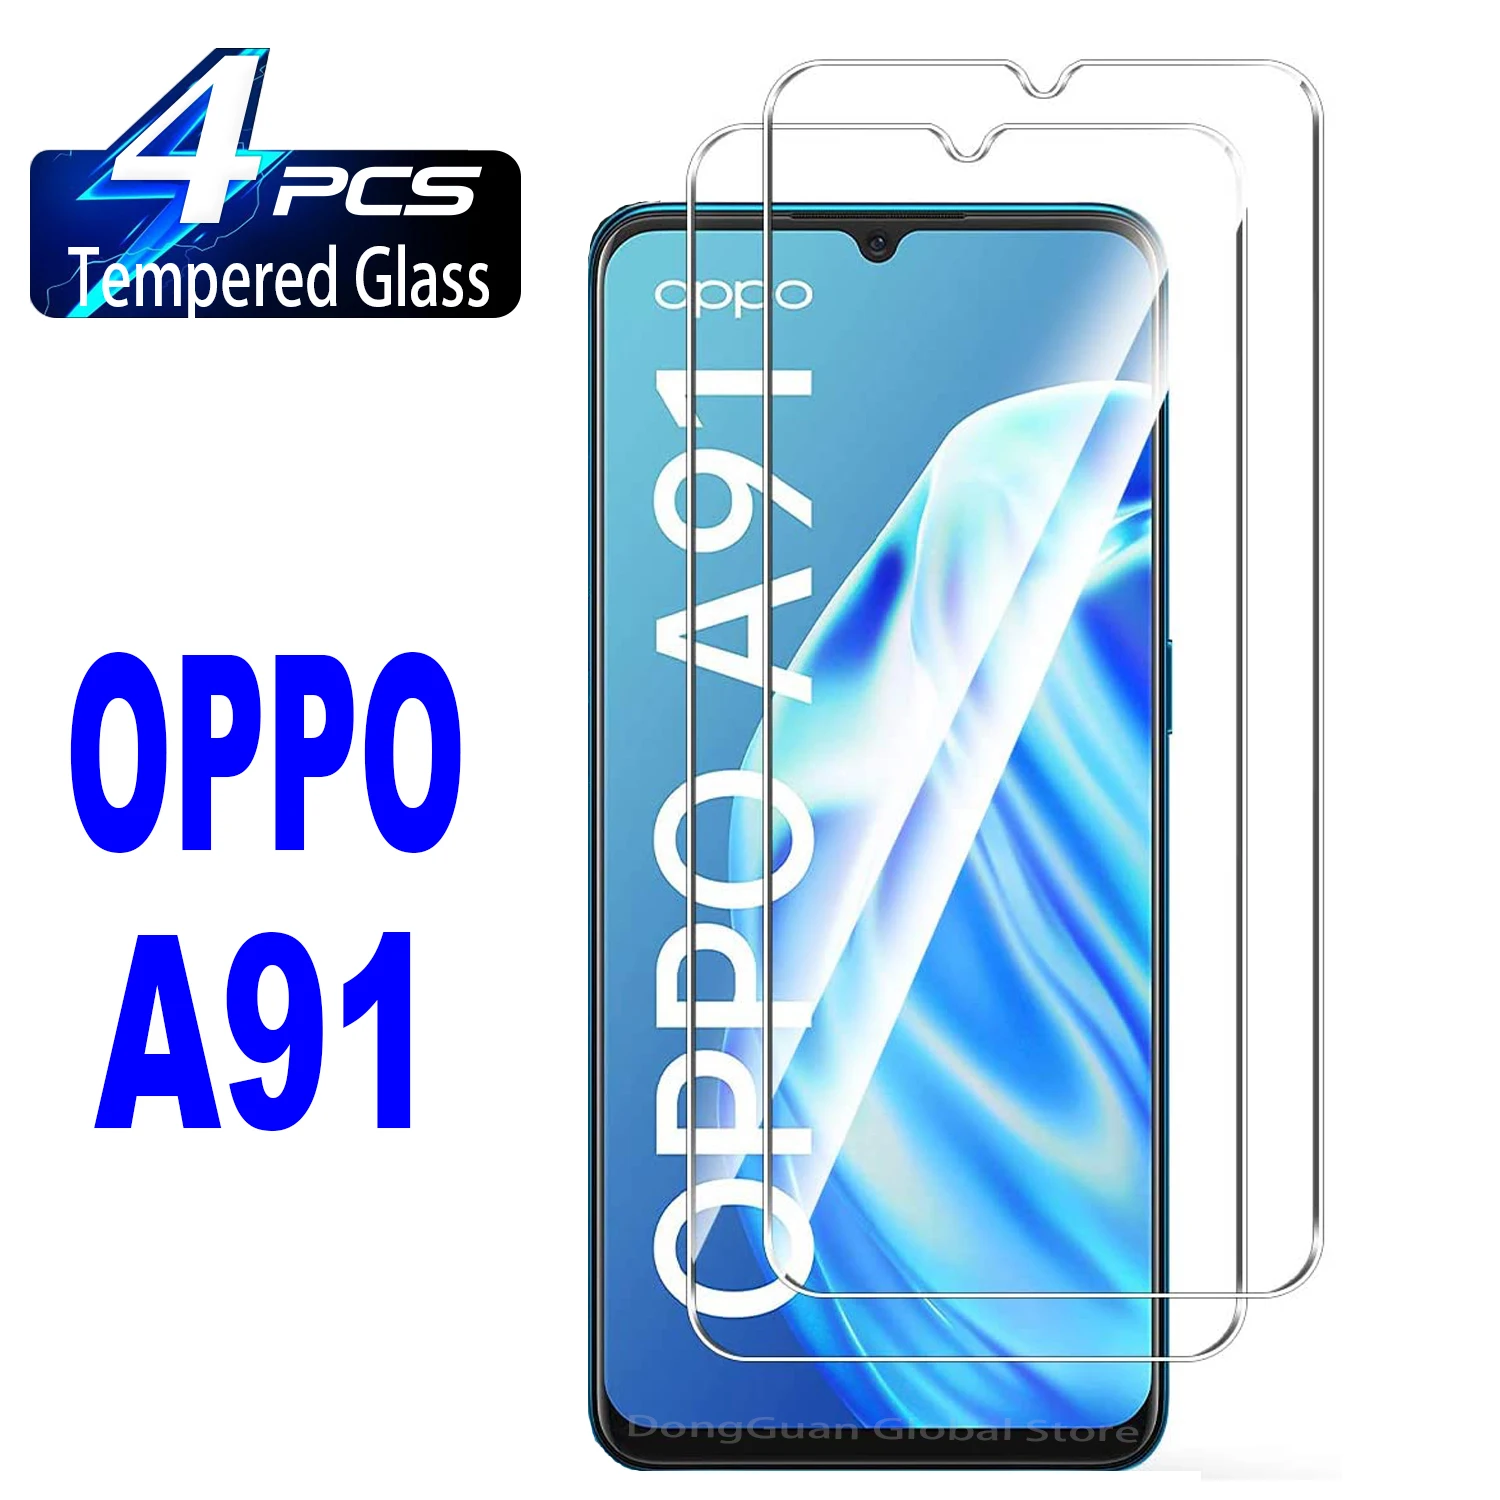 2/4Pcs Tempered Glass For OPPO A91 Screen Protector Glass Film 3pcs 9d protective tempered glass for samsung galaxy a91 a90 5g a90s screen protector film